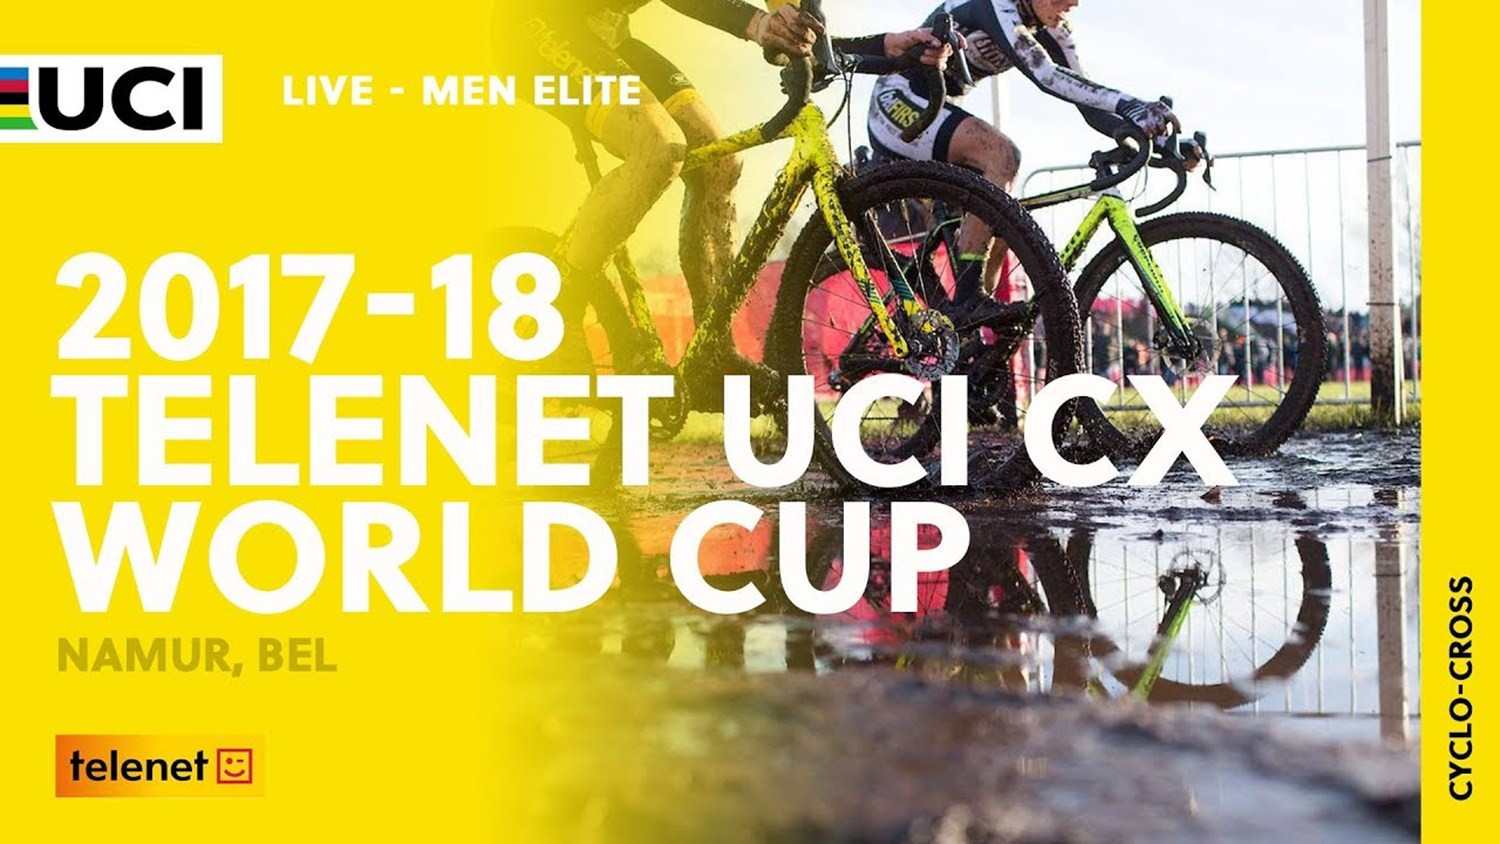 UCI Cyclo-cross World Cup set to continue in Belgium